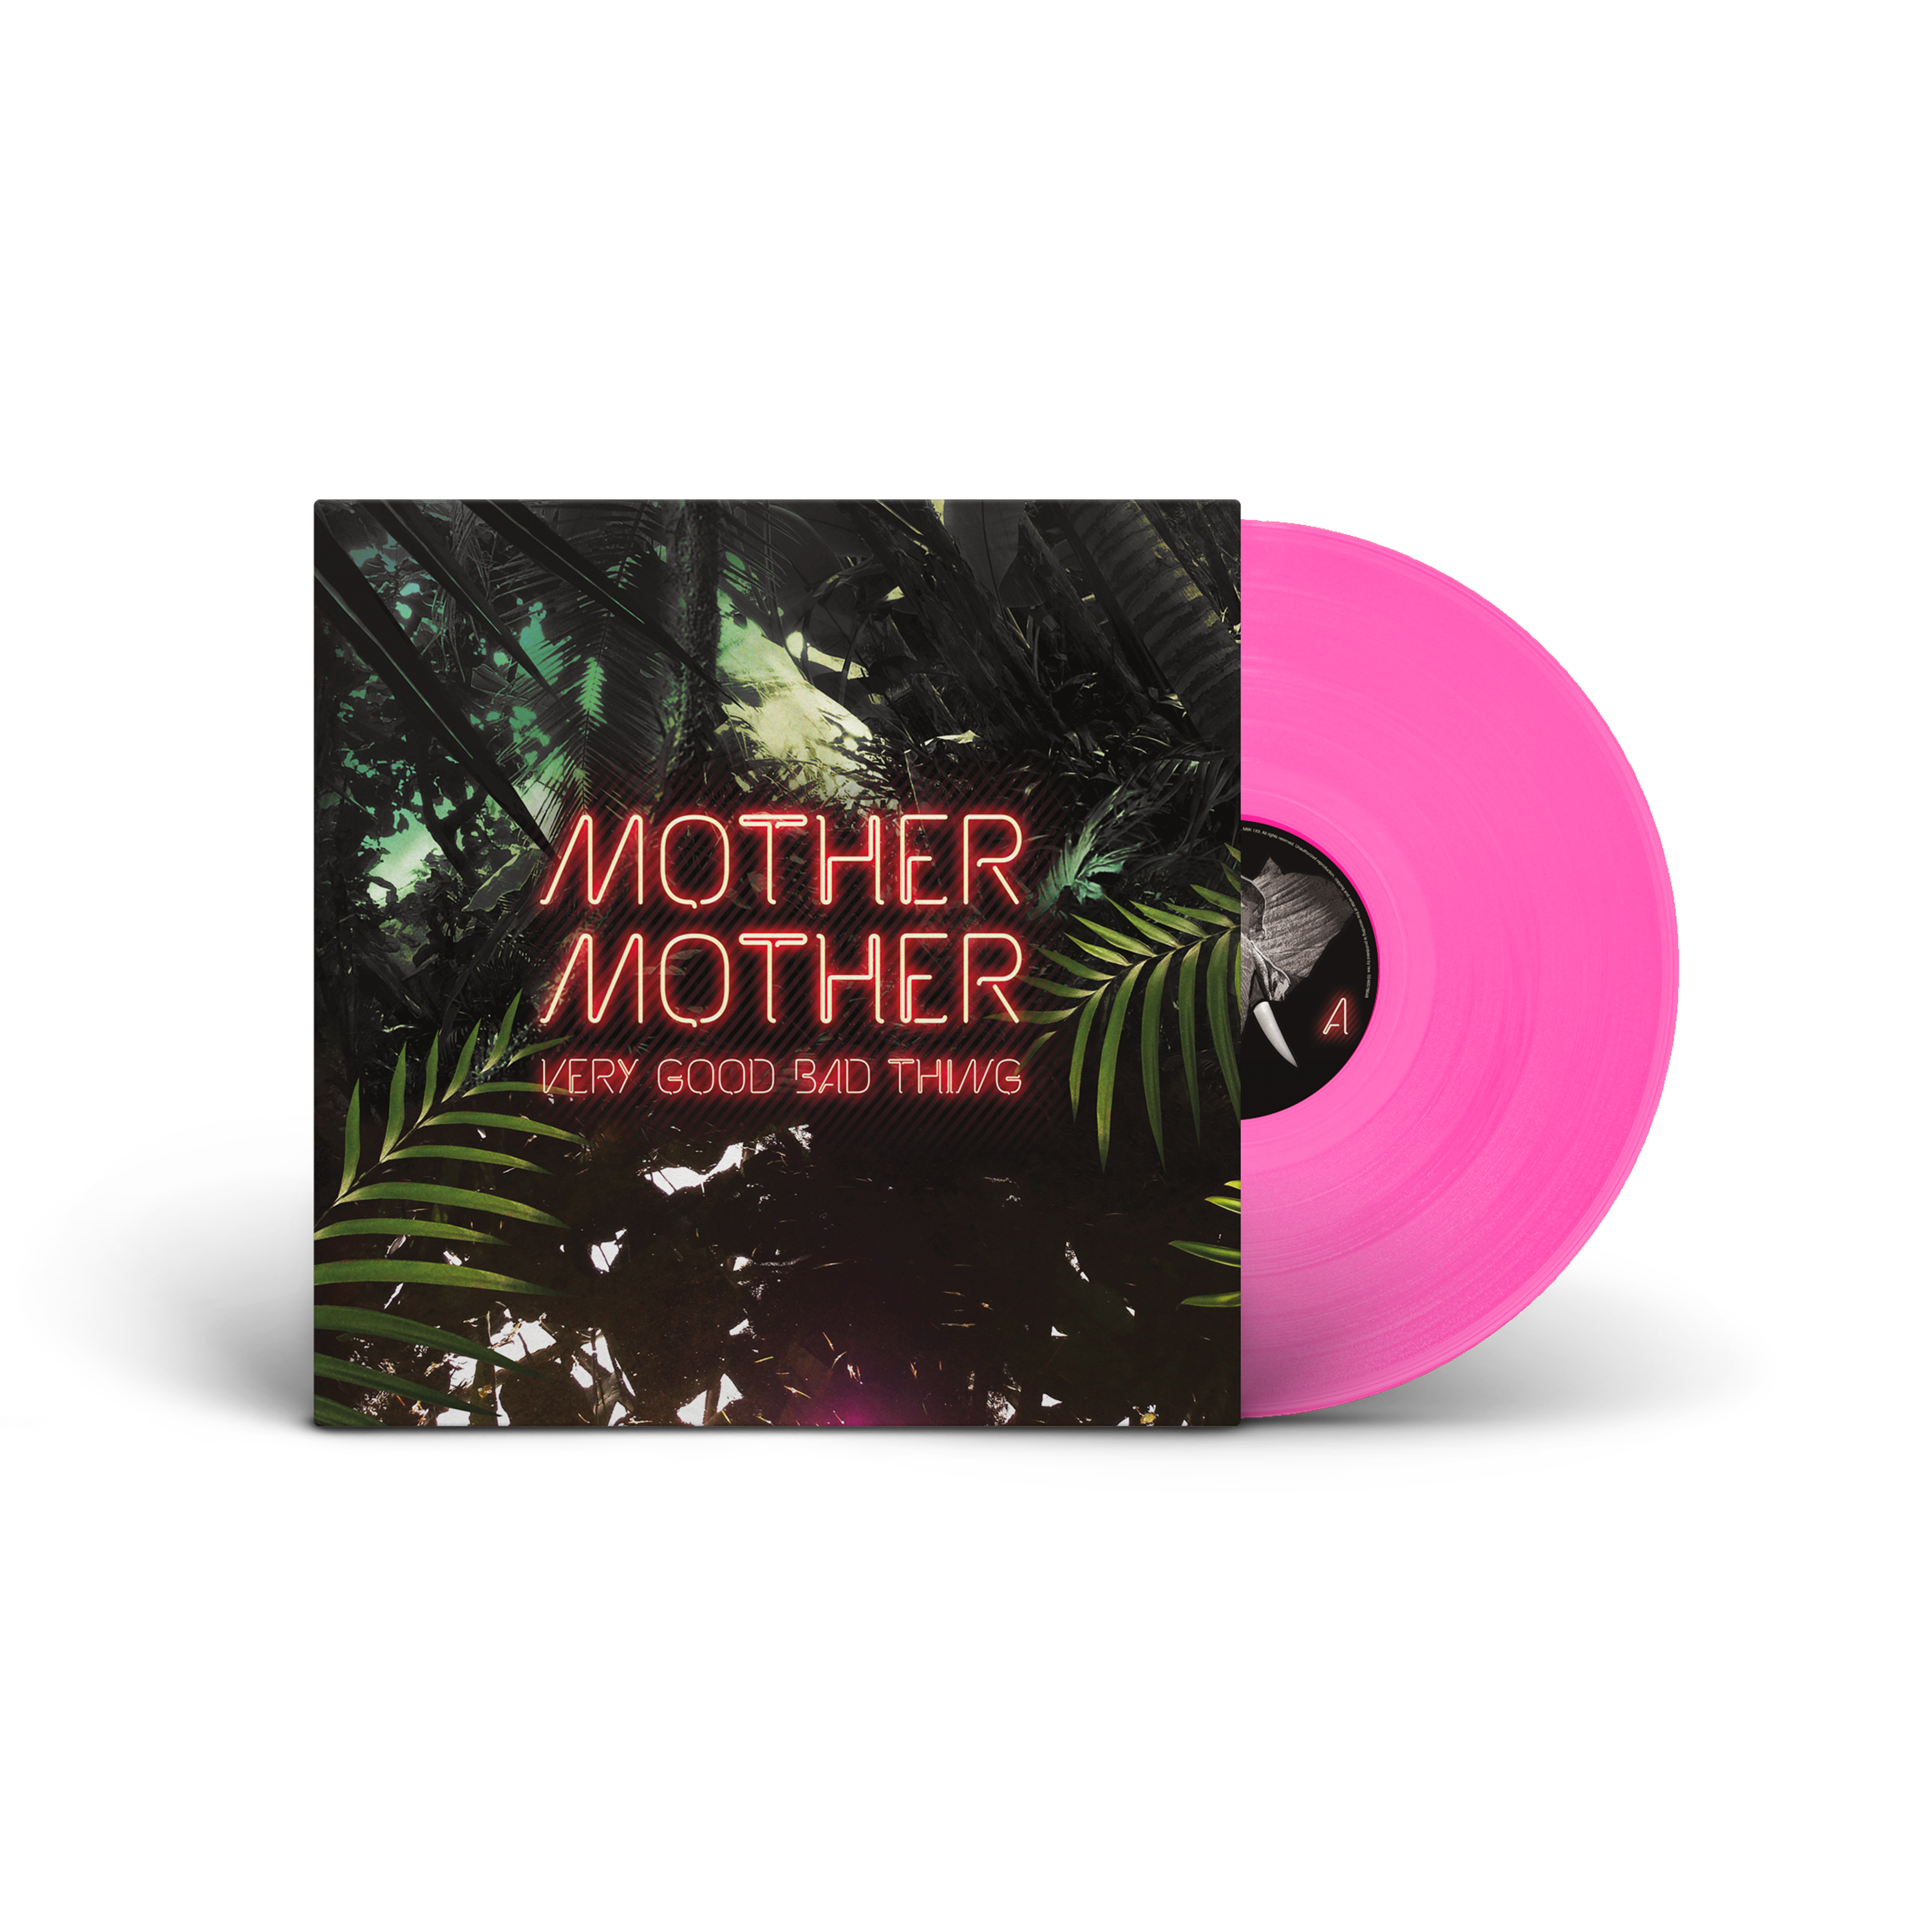 Very Good Bad Thing LP (10th Anniversary Edition / Translucent Pink Vinyl) [PRE-ORDER]